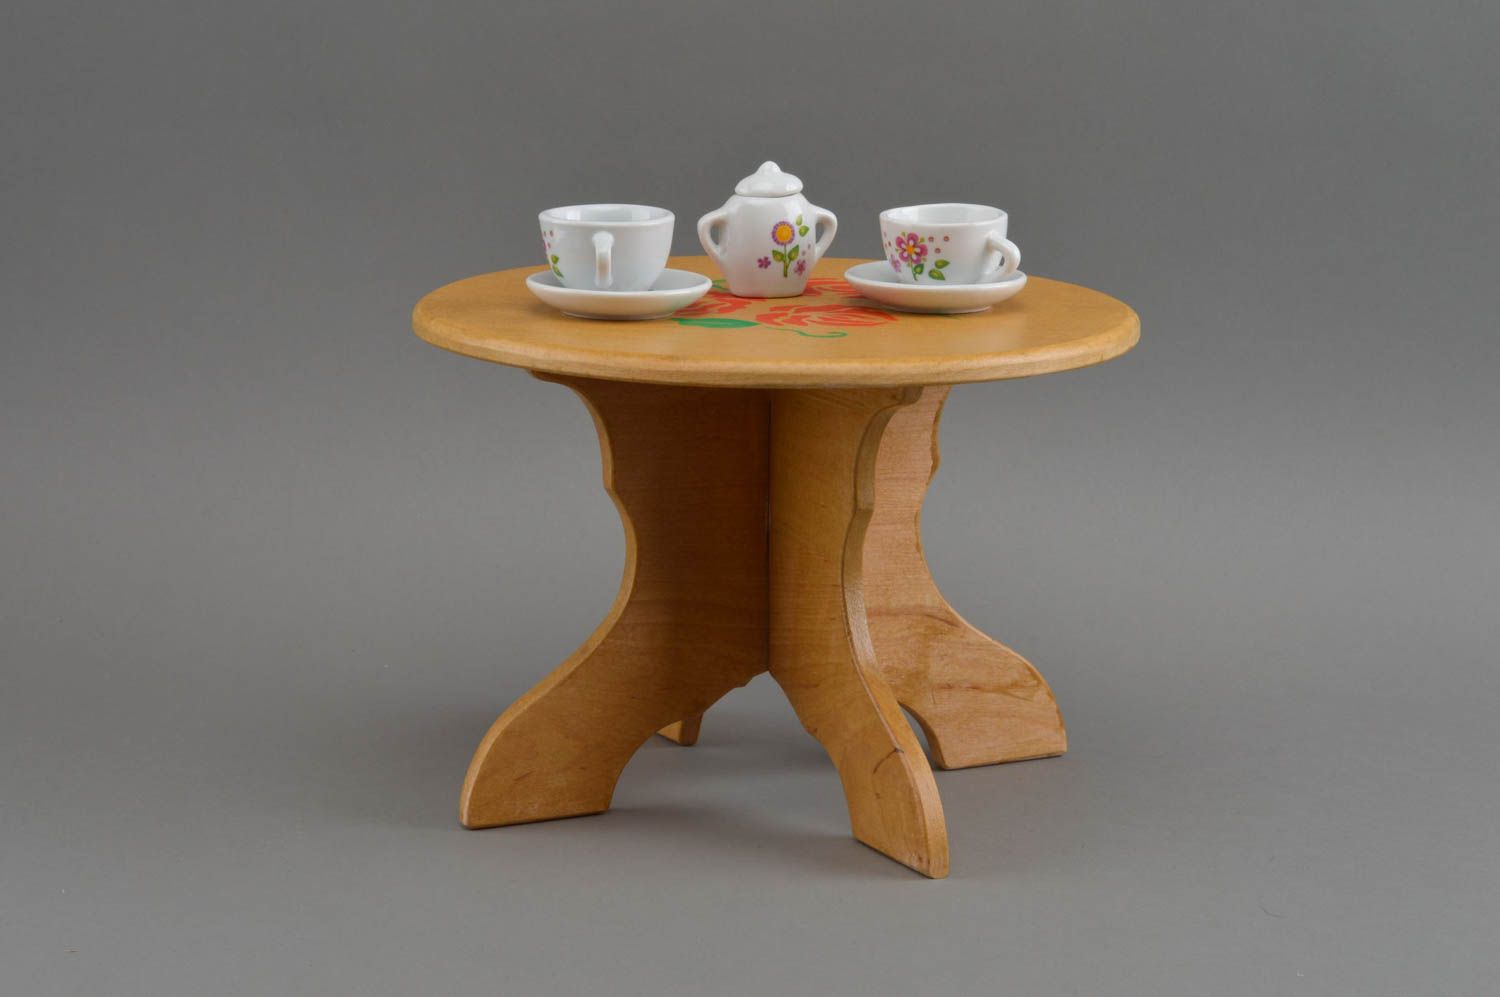 Handmade toy table unusual furniture for dolls decorative wooden toys photo 1